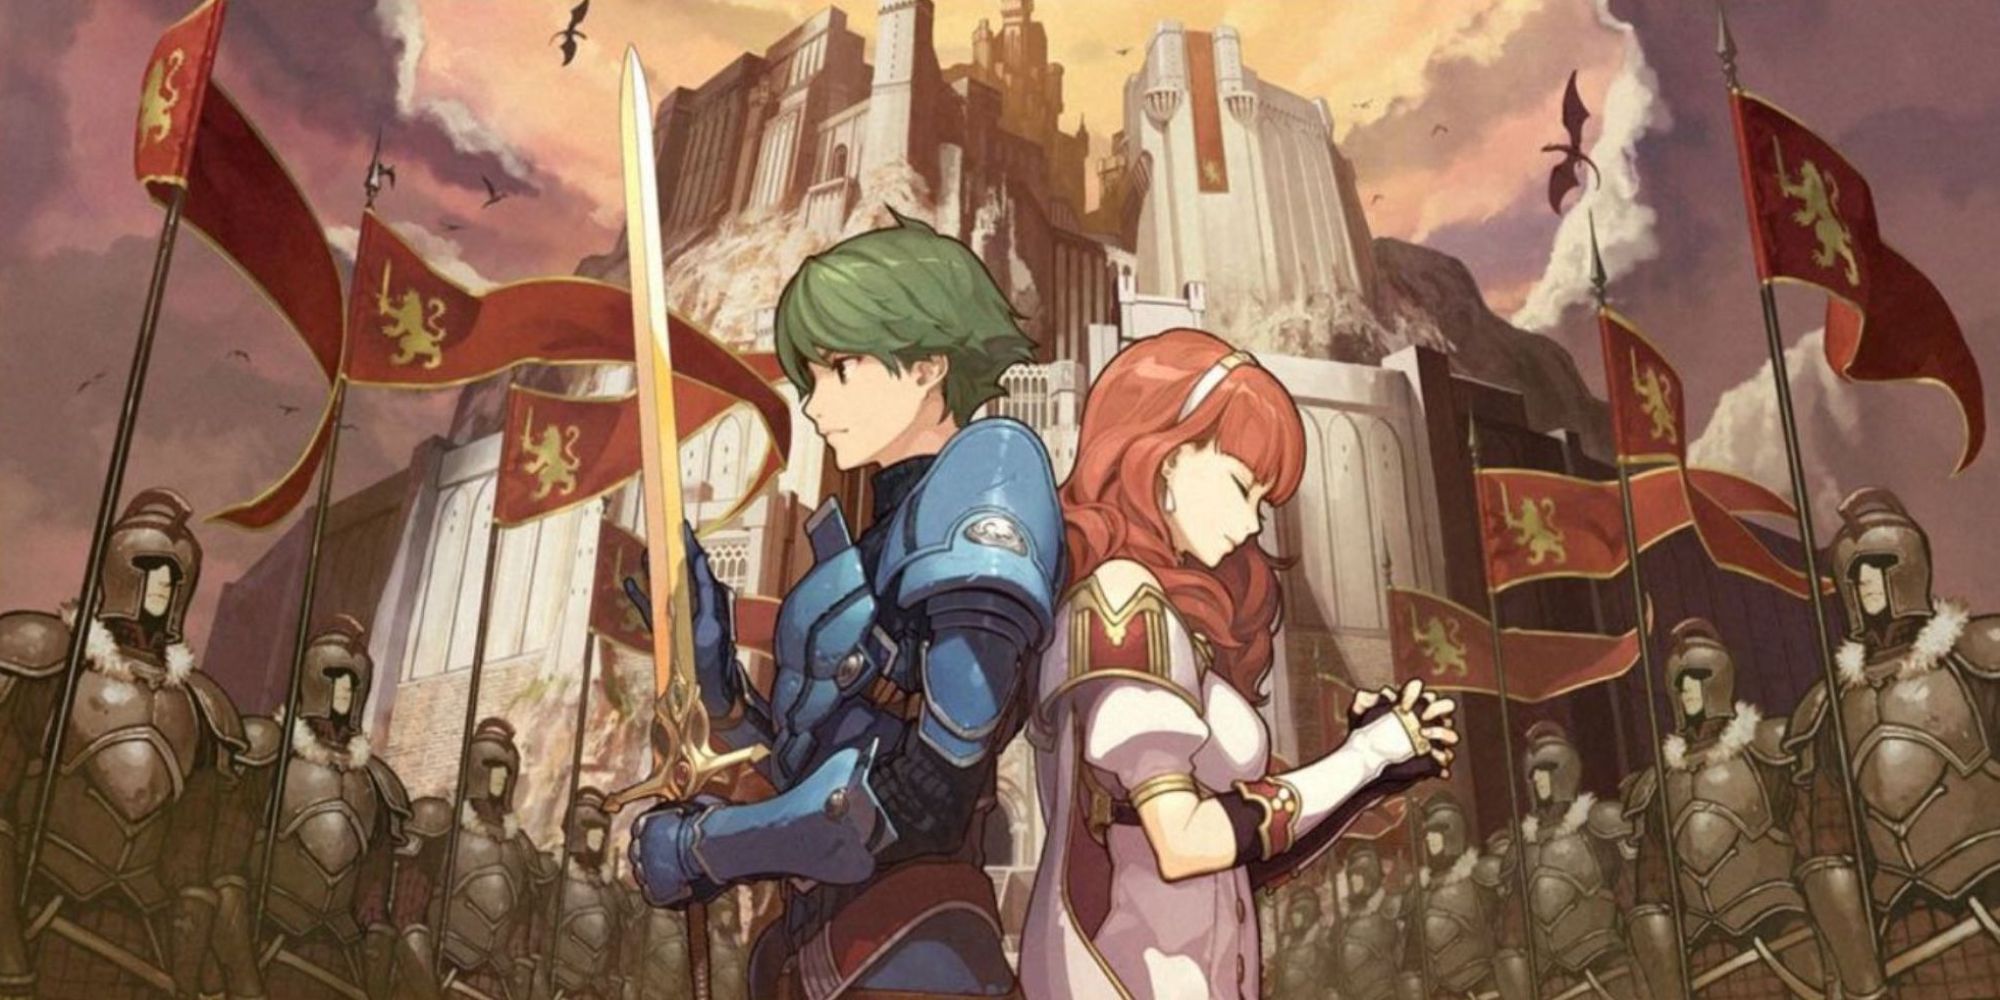 Alm and Celica stand back to back in the key art for Fire Emblem Echoes